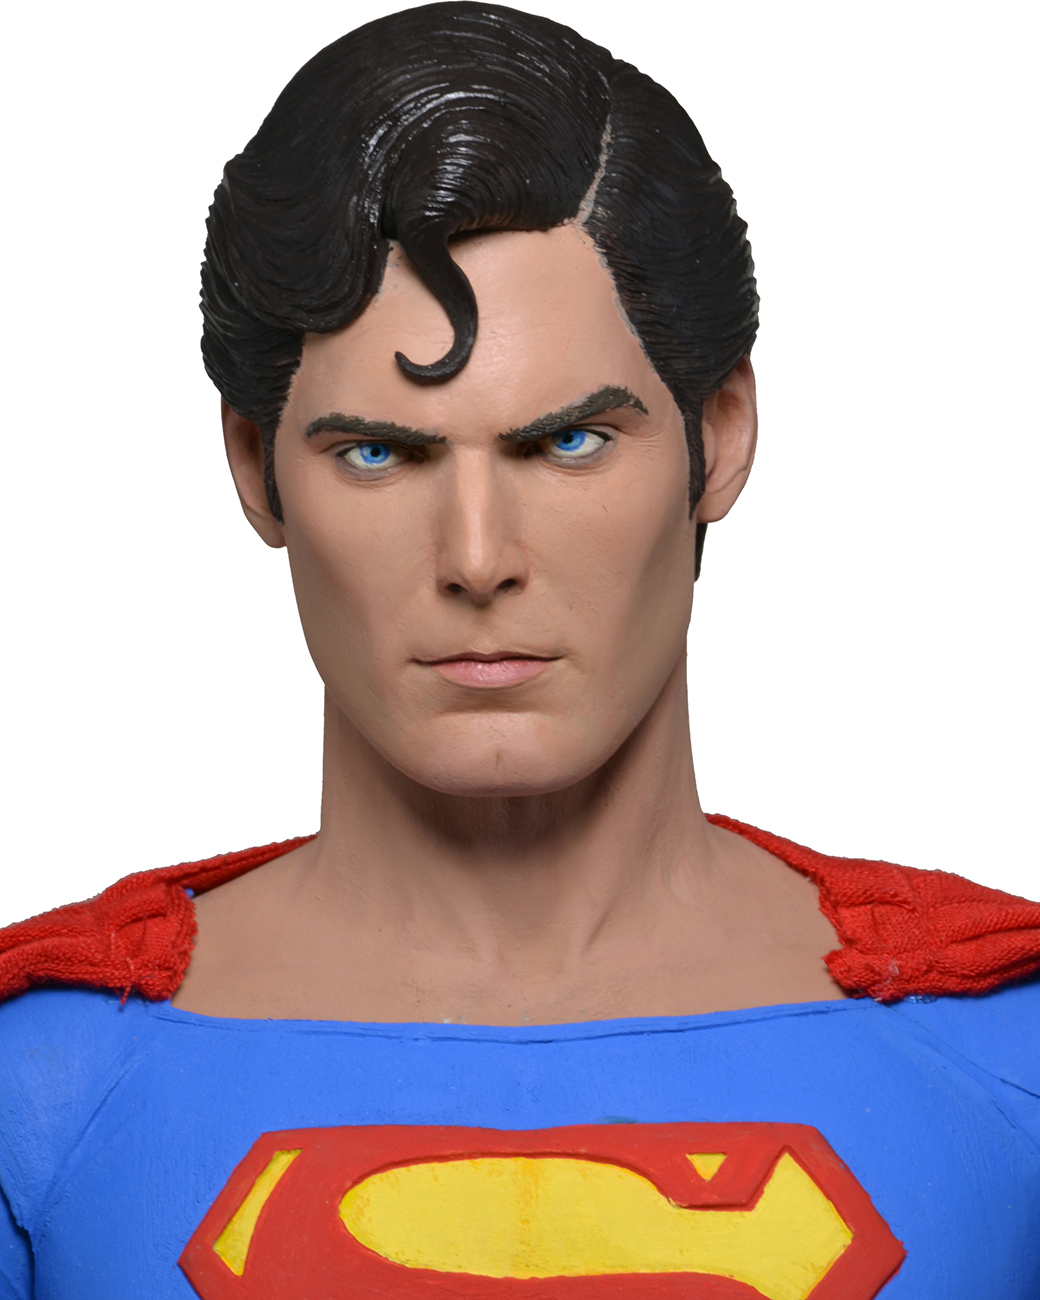 [NECA] Superman (Christopher Reeve) - 1/4 Scale Action Figure 1300h-Reeve-Superman3